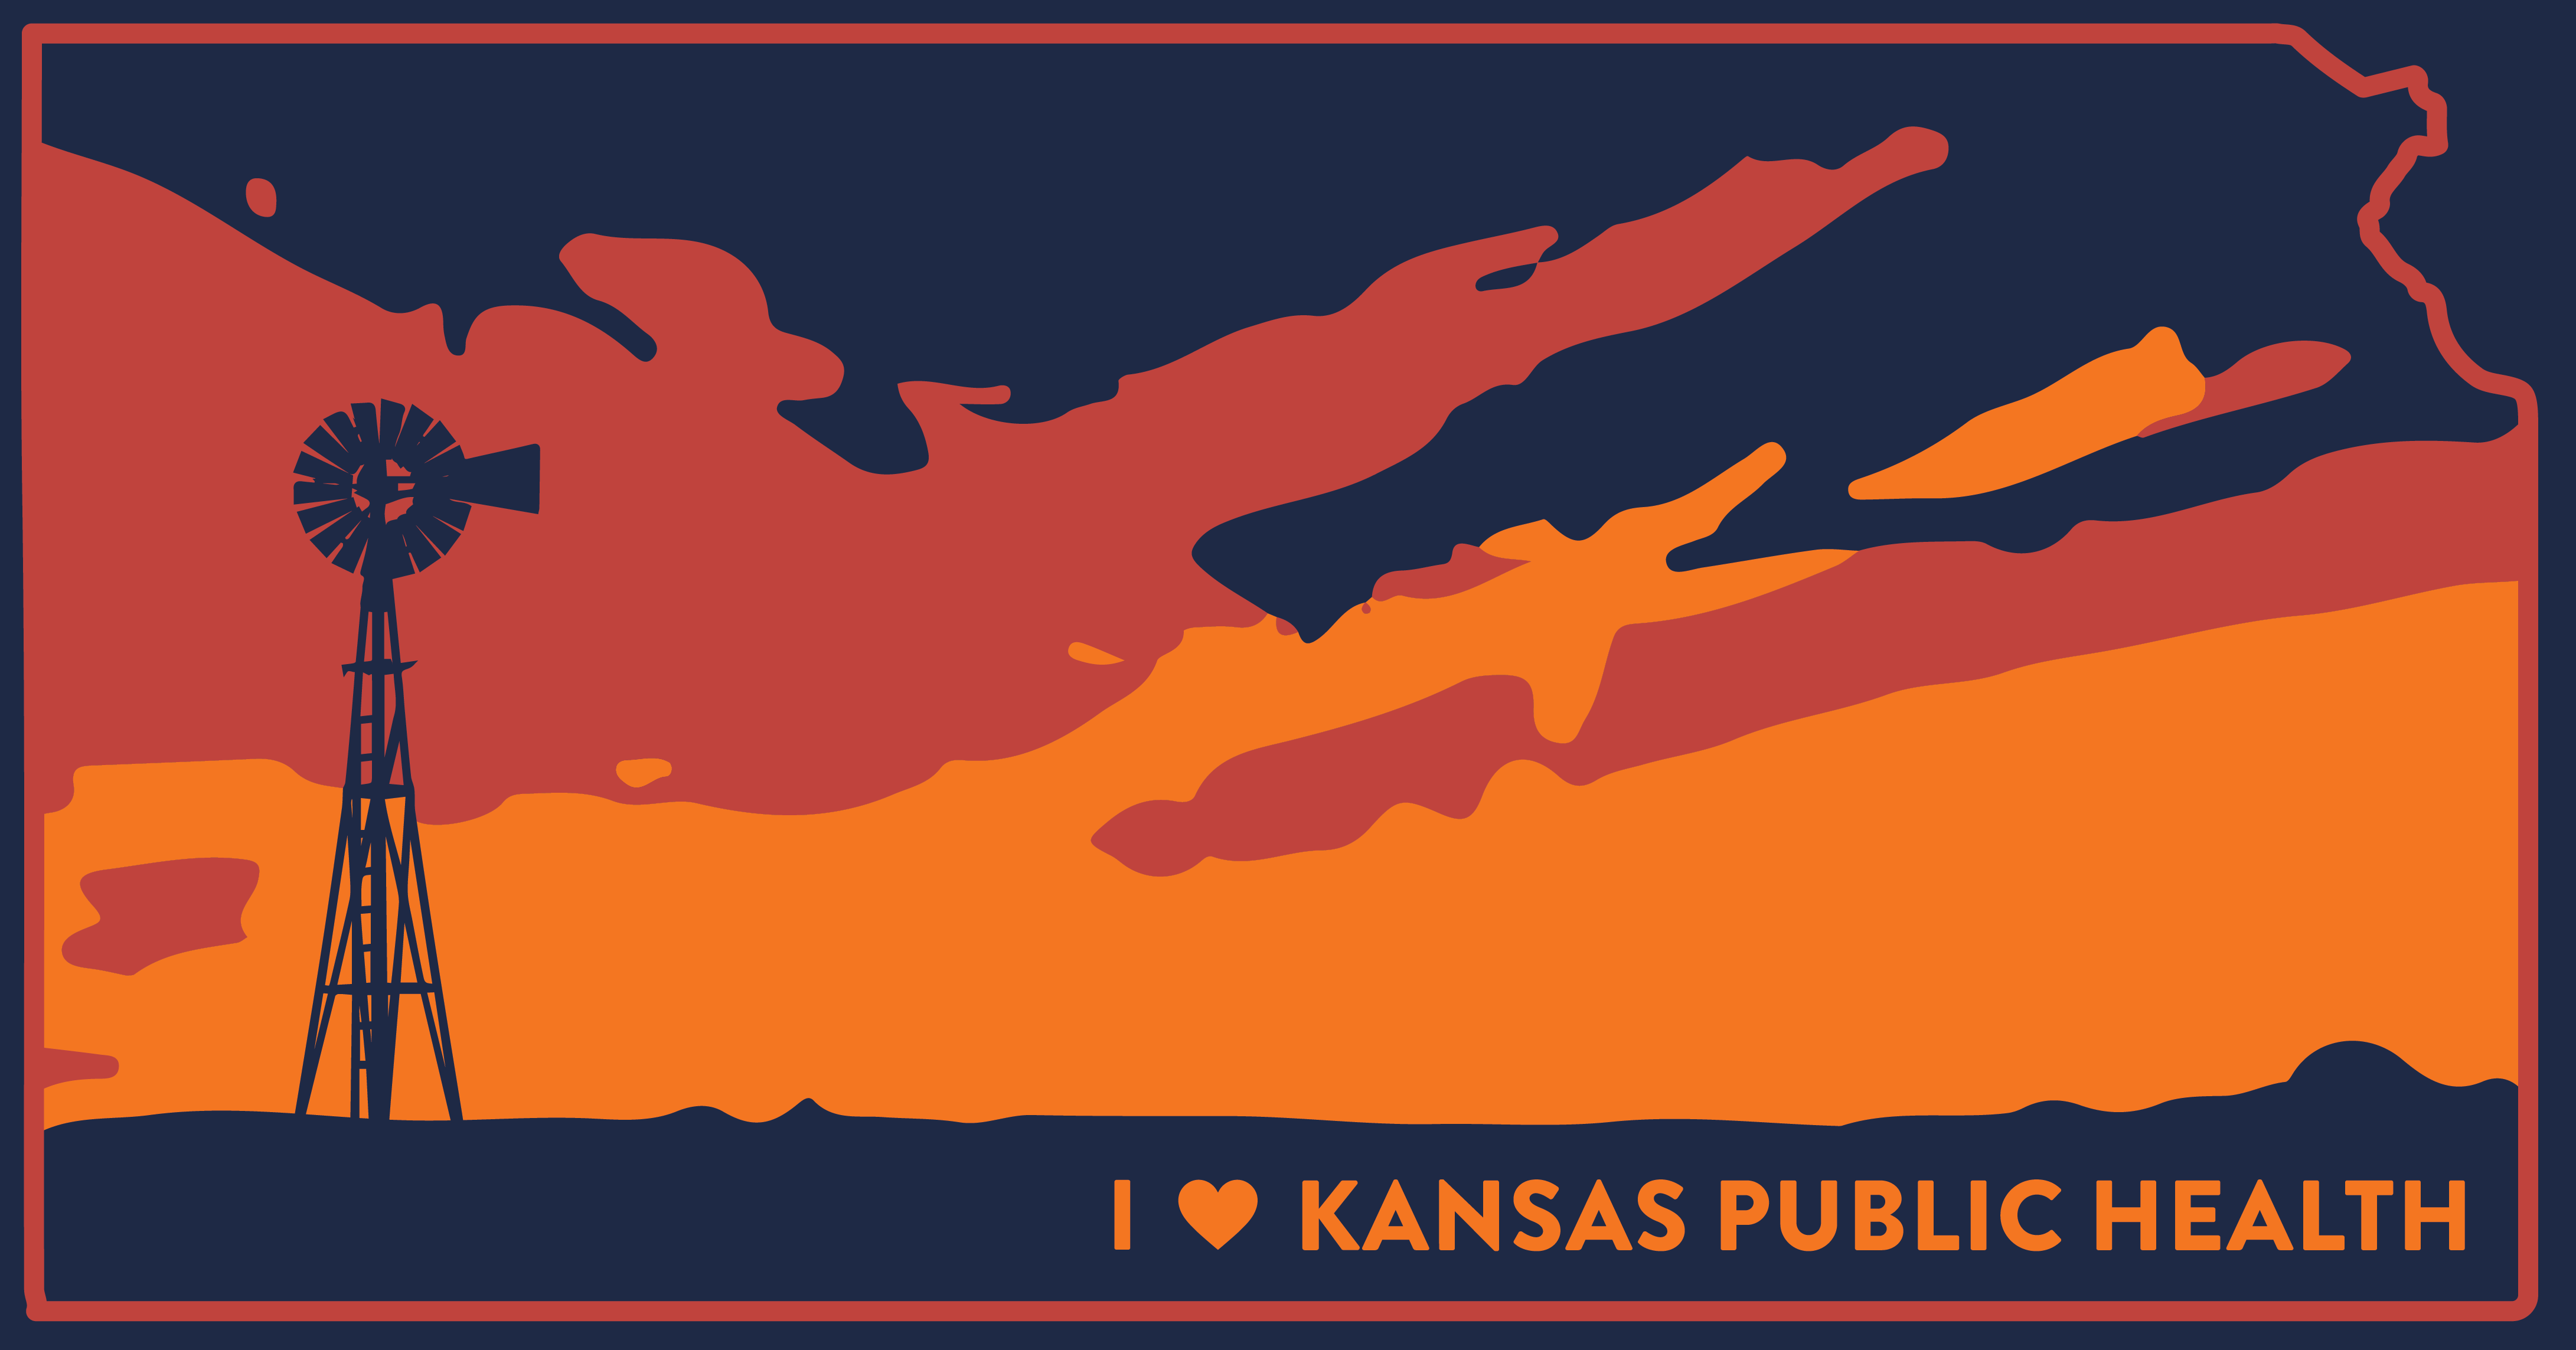 Graphic image of sunset with windmill silhoutte in the shape of Kansas with I heart Kansas Public Health text written in the bottom left corner